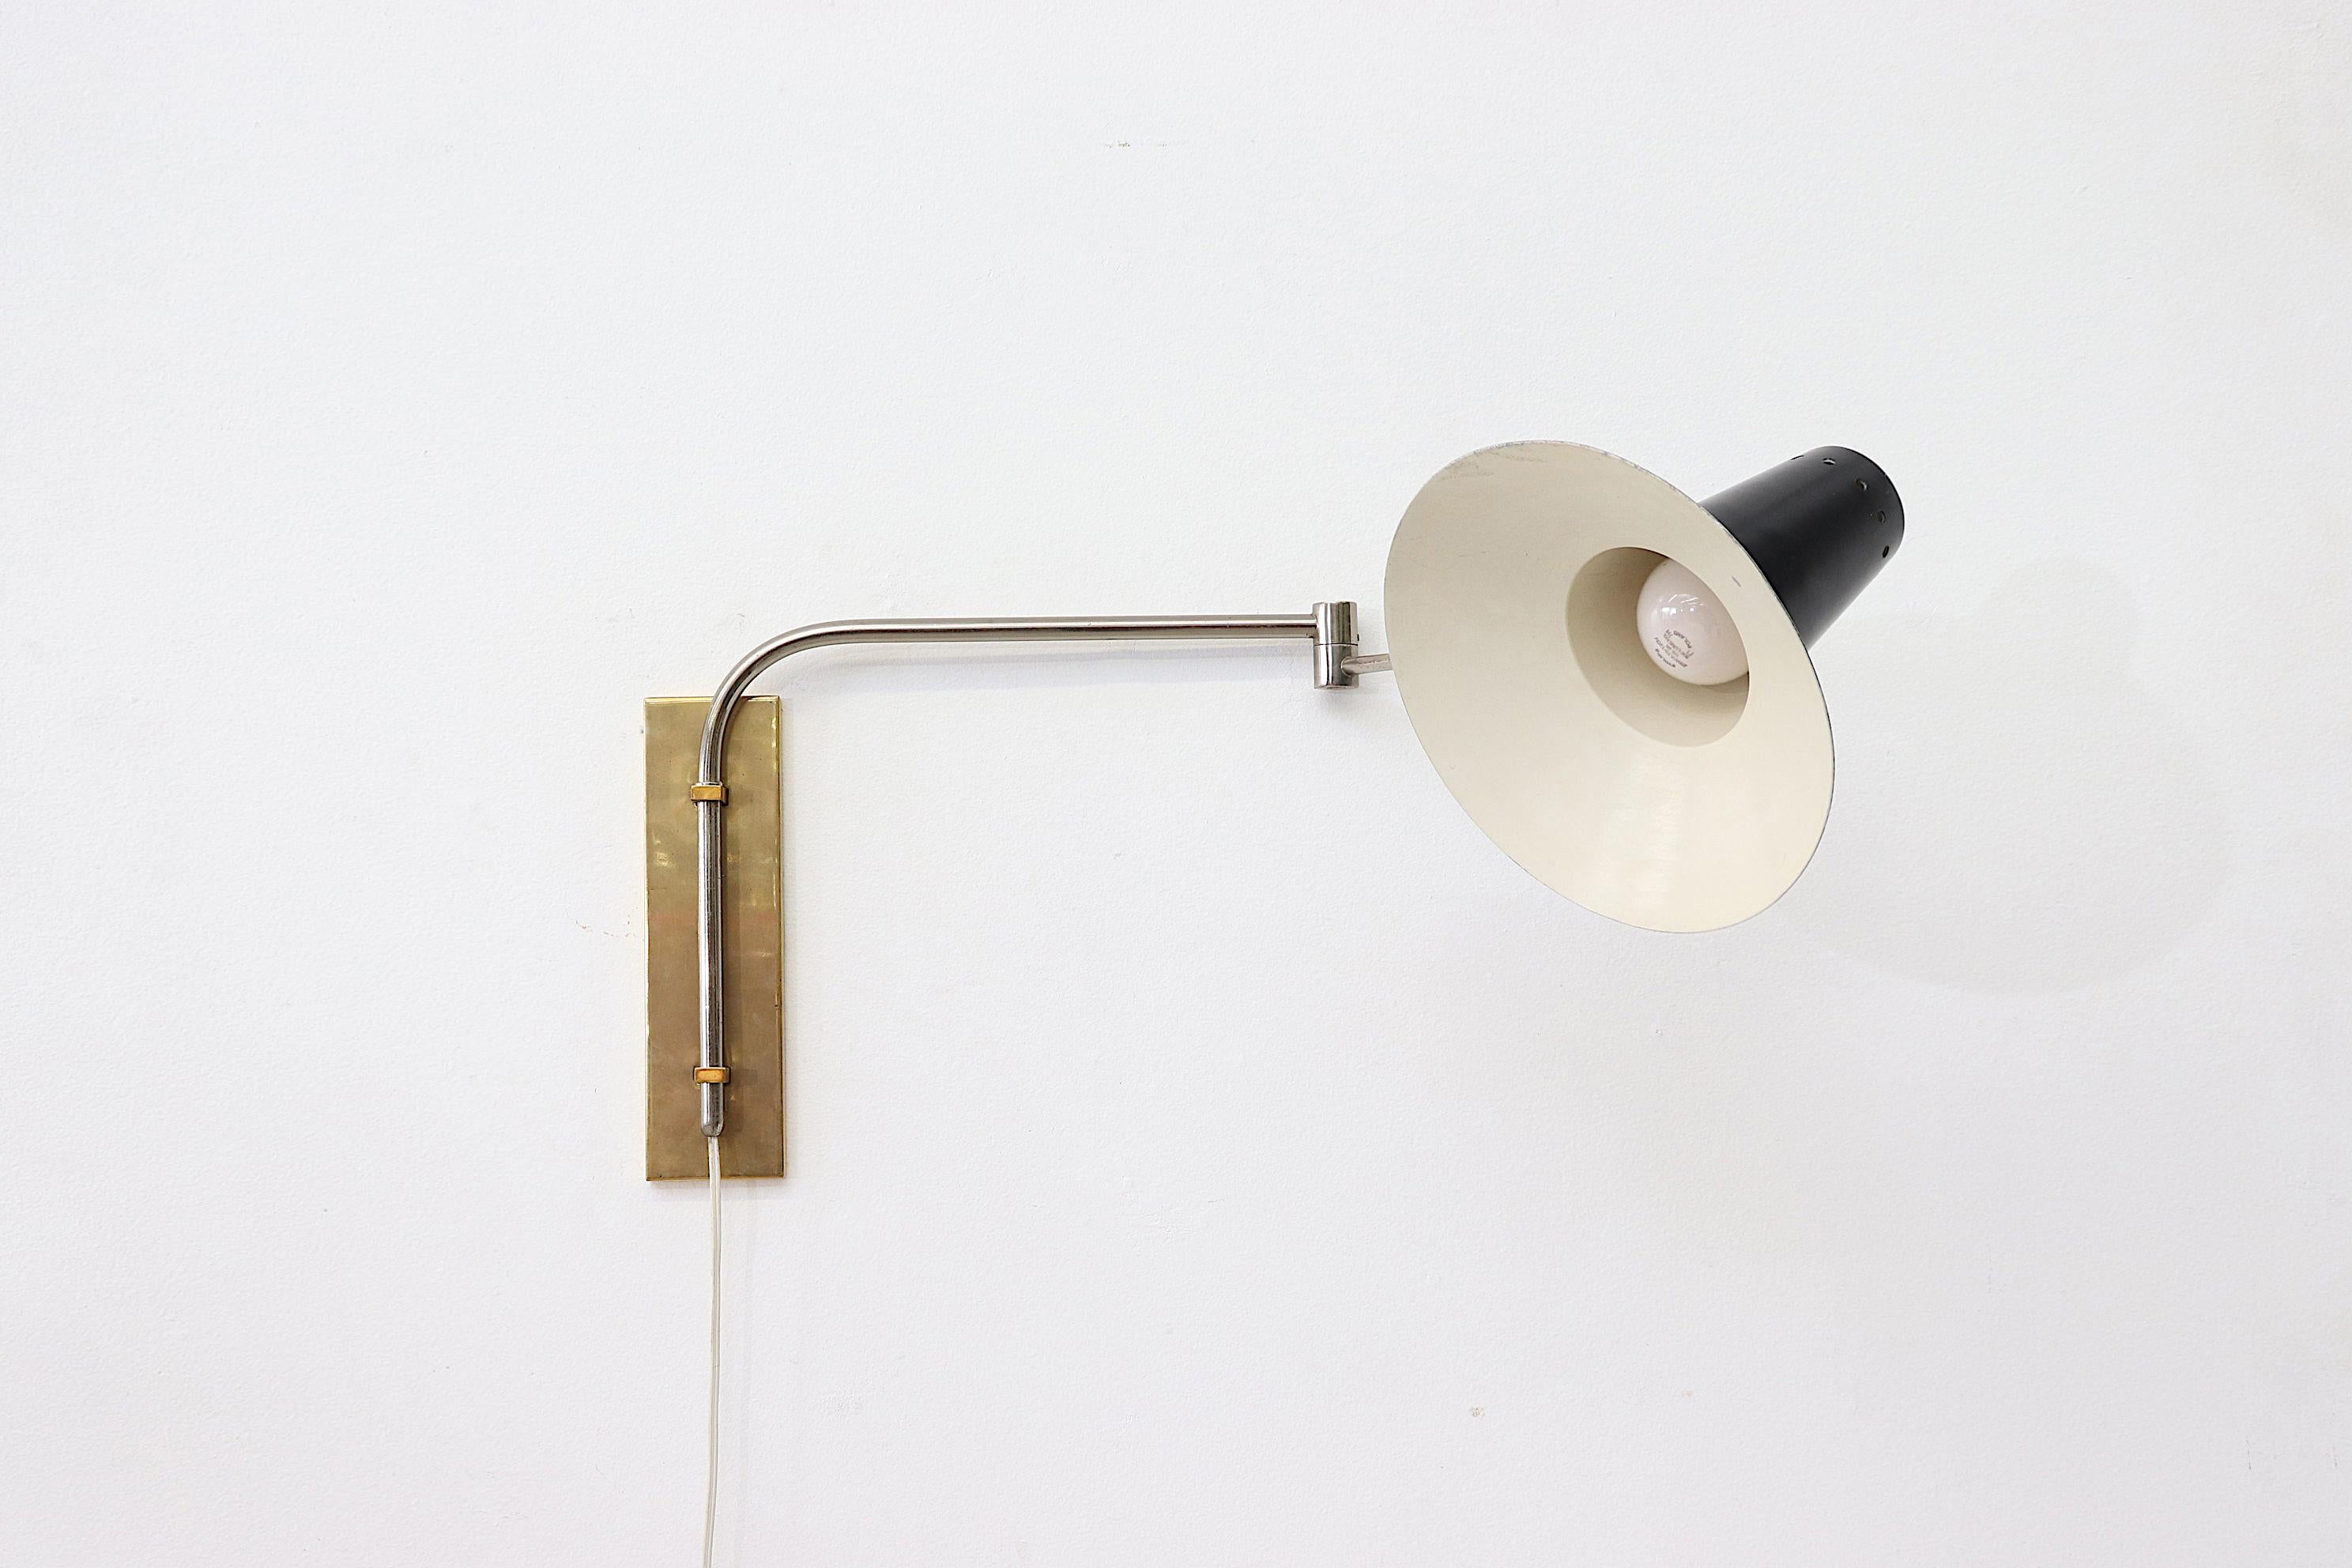 Black Rietveld style industrial wall mount lamp with a chrome articulating arm and brass metal wall mount. In original condition with visible wear, minimal enamel loss. Patina is consistent with its age and usage.